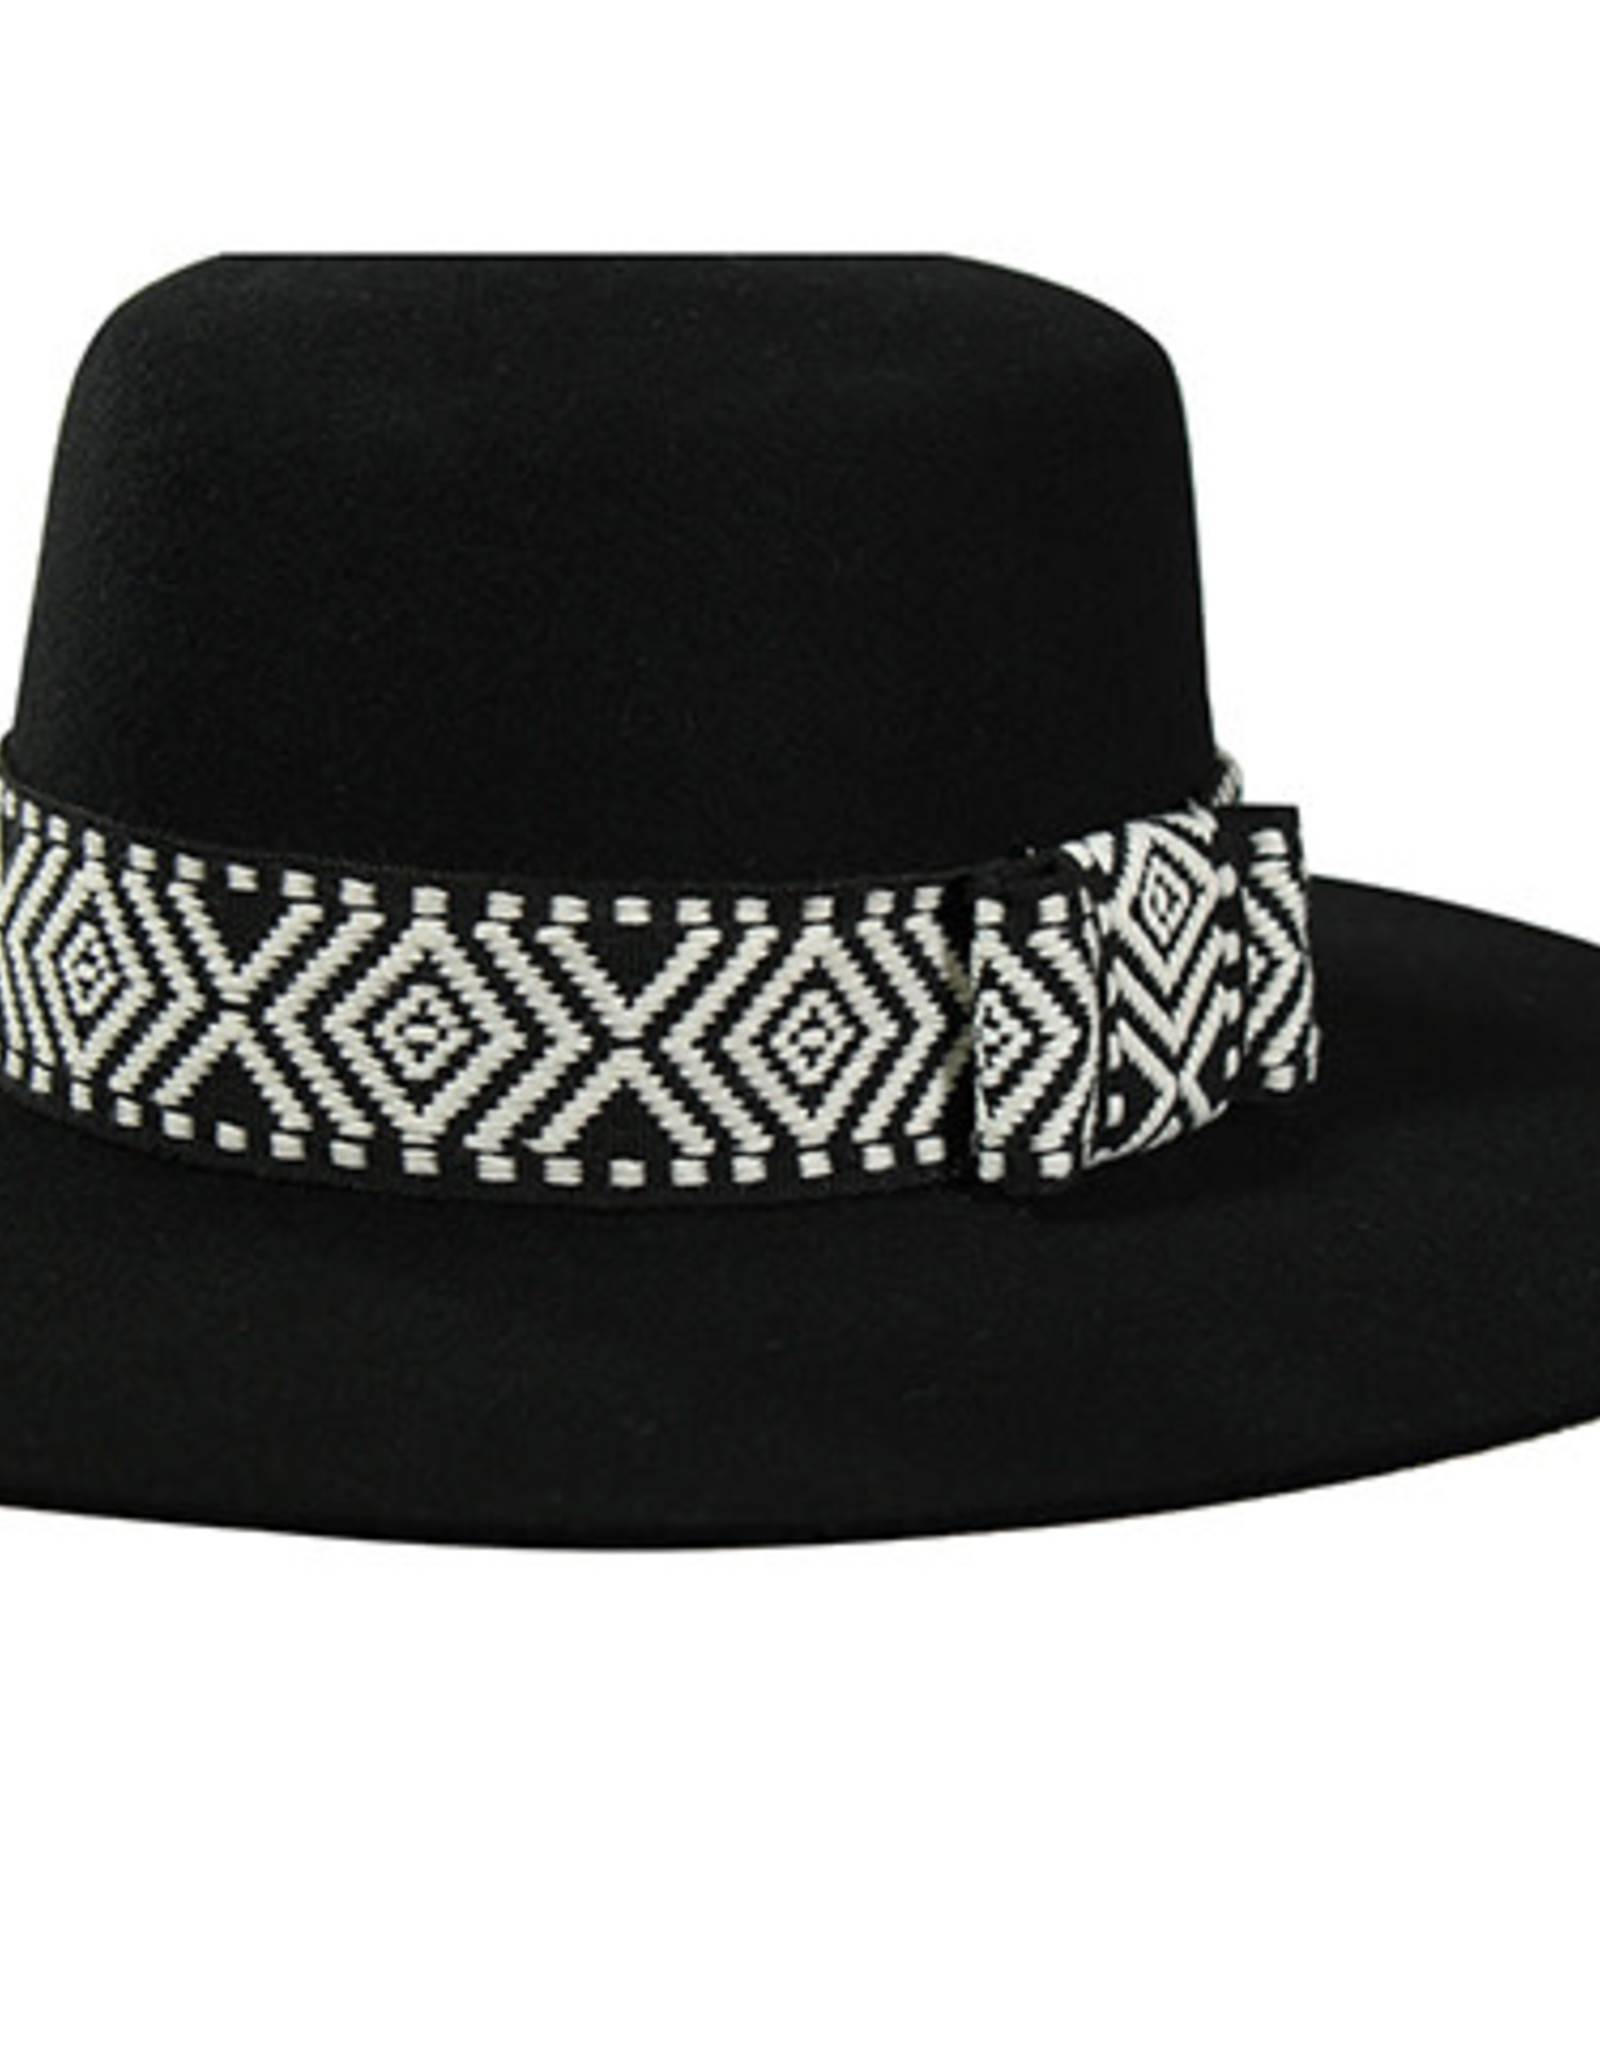 Black and White 1 1/2 inch Wide Fabric X Pattern Hatband